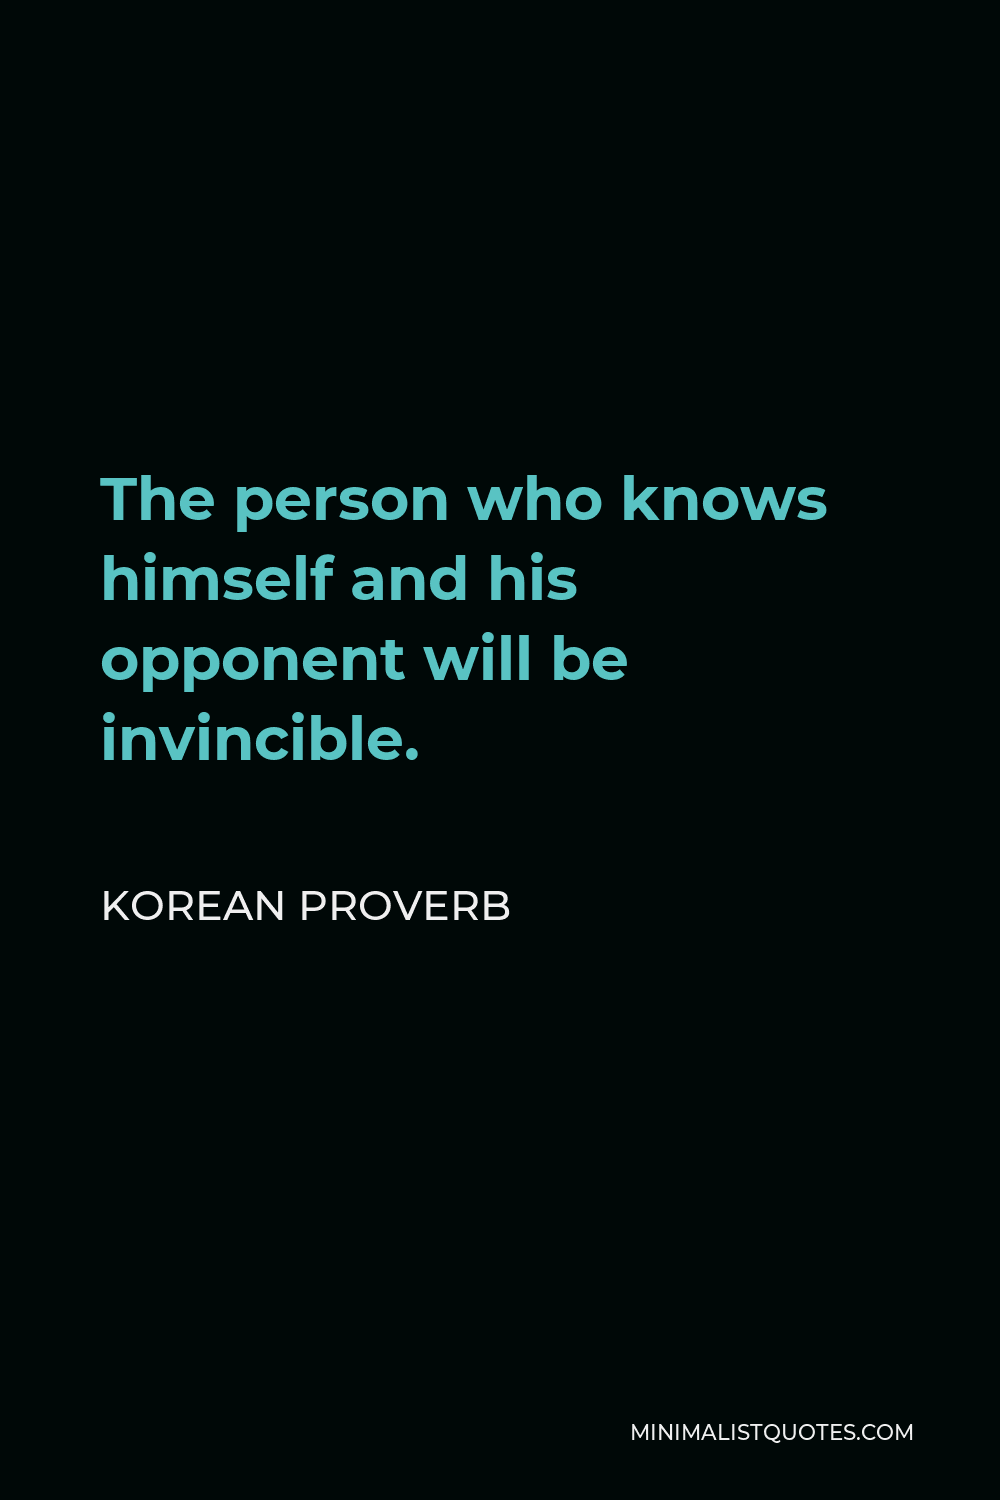 Korean Proverb Quote - The person who knows himself and his opponent will be invincible.